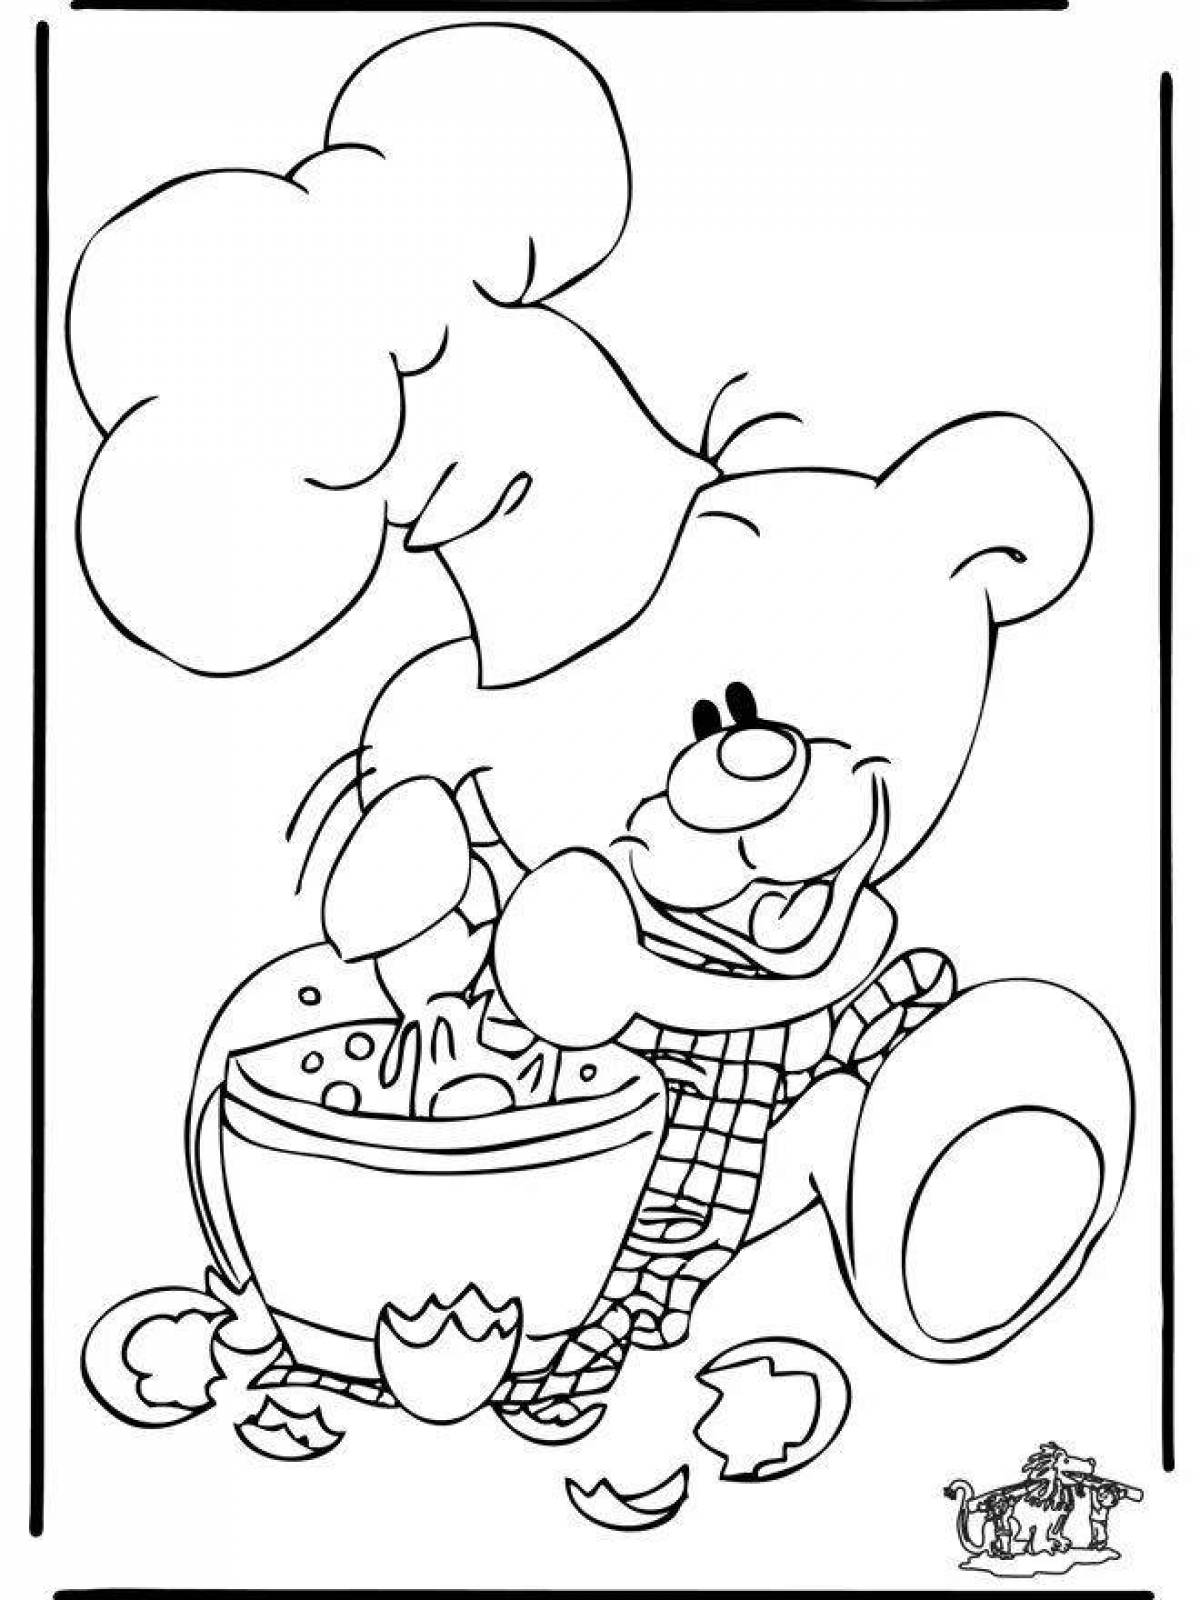 Colorful bright chef coloring page